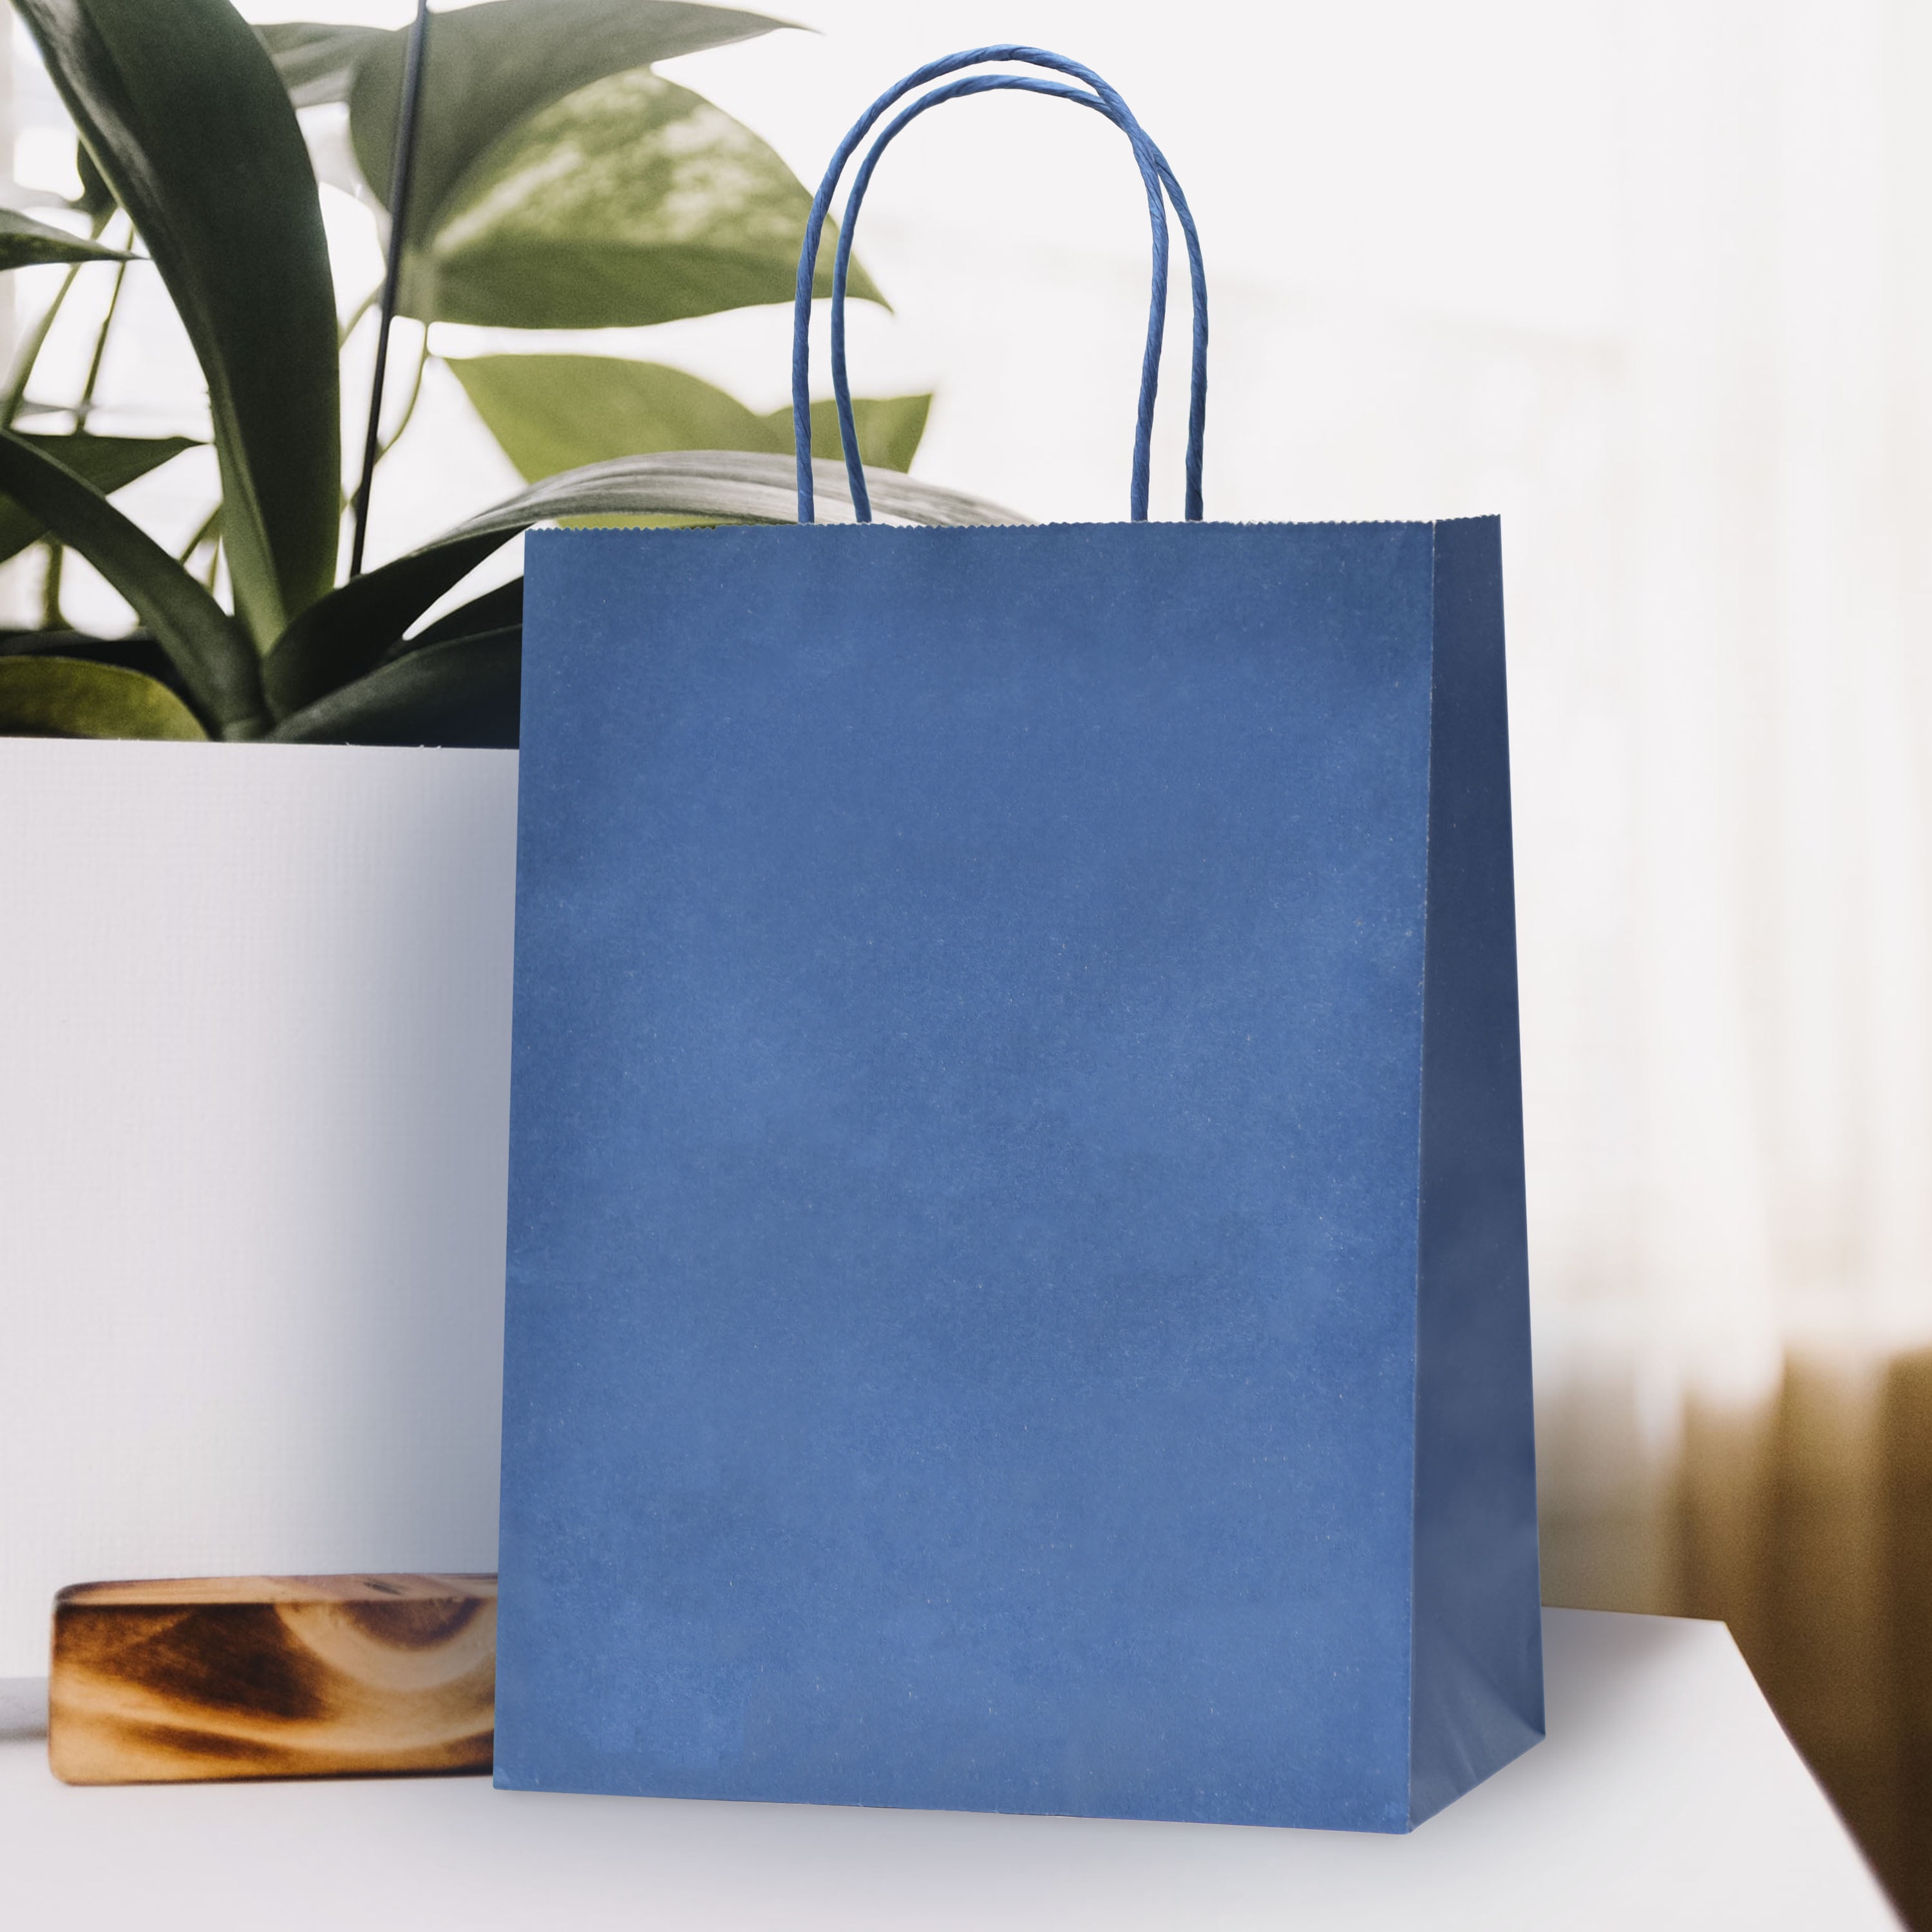 SHOPDAY Brown Paper Gift Bags, Small Kraft Paper Bags with Handles Bulk  5.25x3.75x8 100 Pack, Recyclable Craft Bags for Handwork, Shopping Bags,  Party